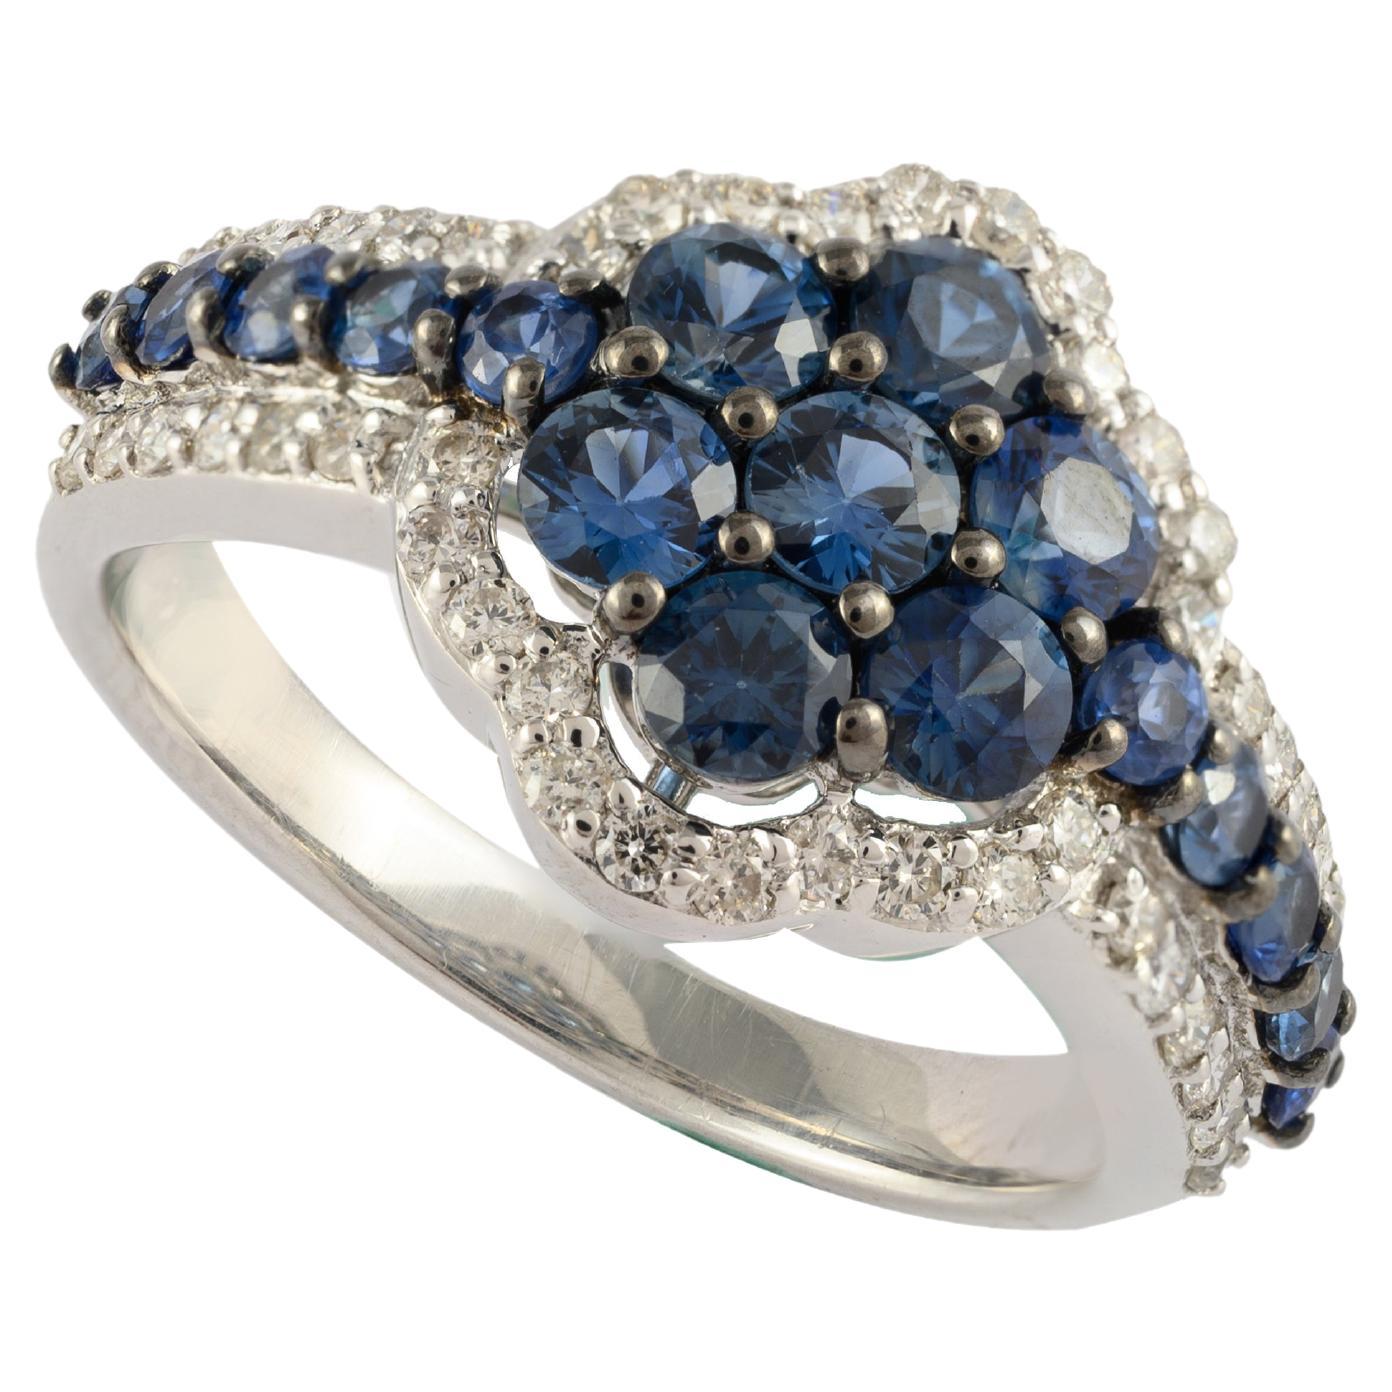 For Sale:  Unique Blue Sapphire Floral Ring with Diamonds in 14k Solid White Gold